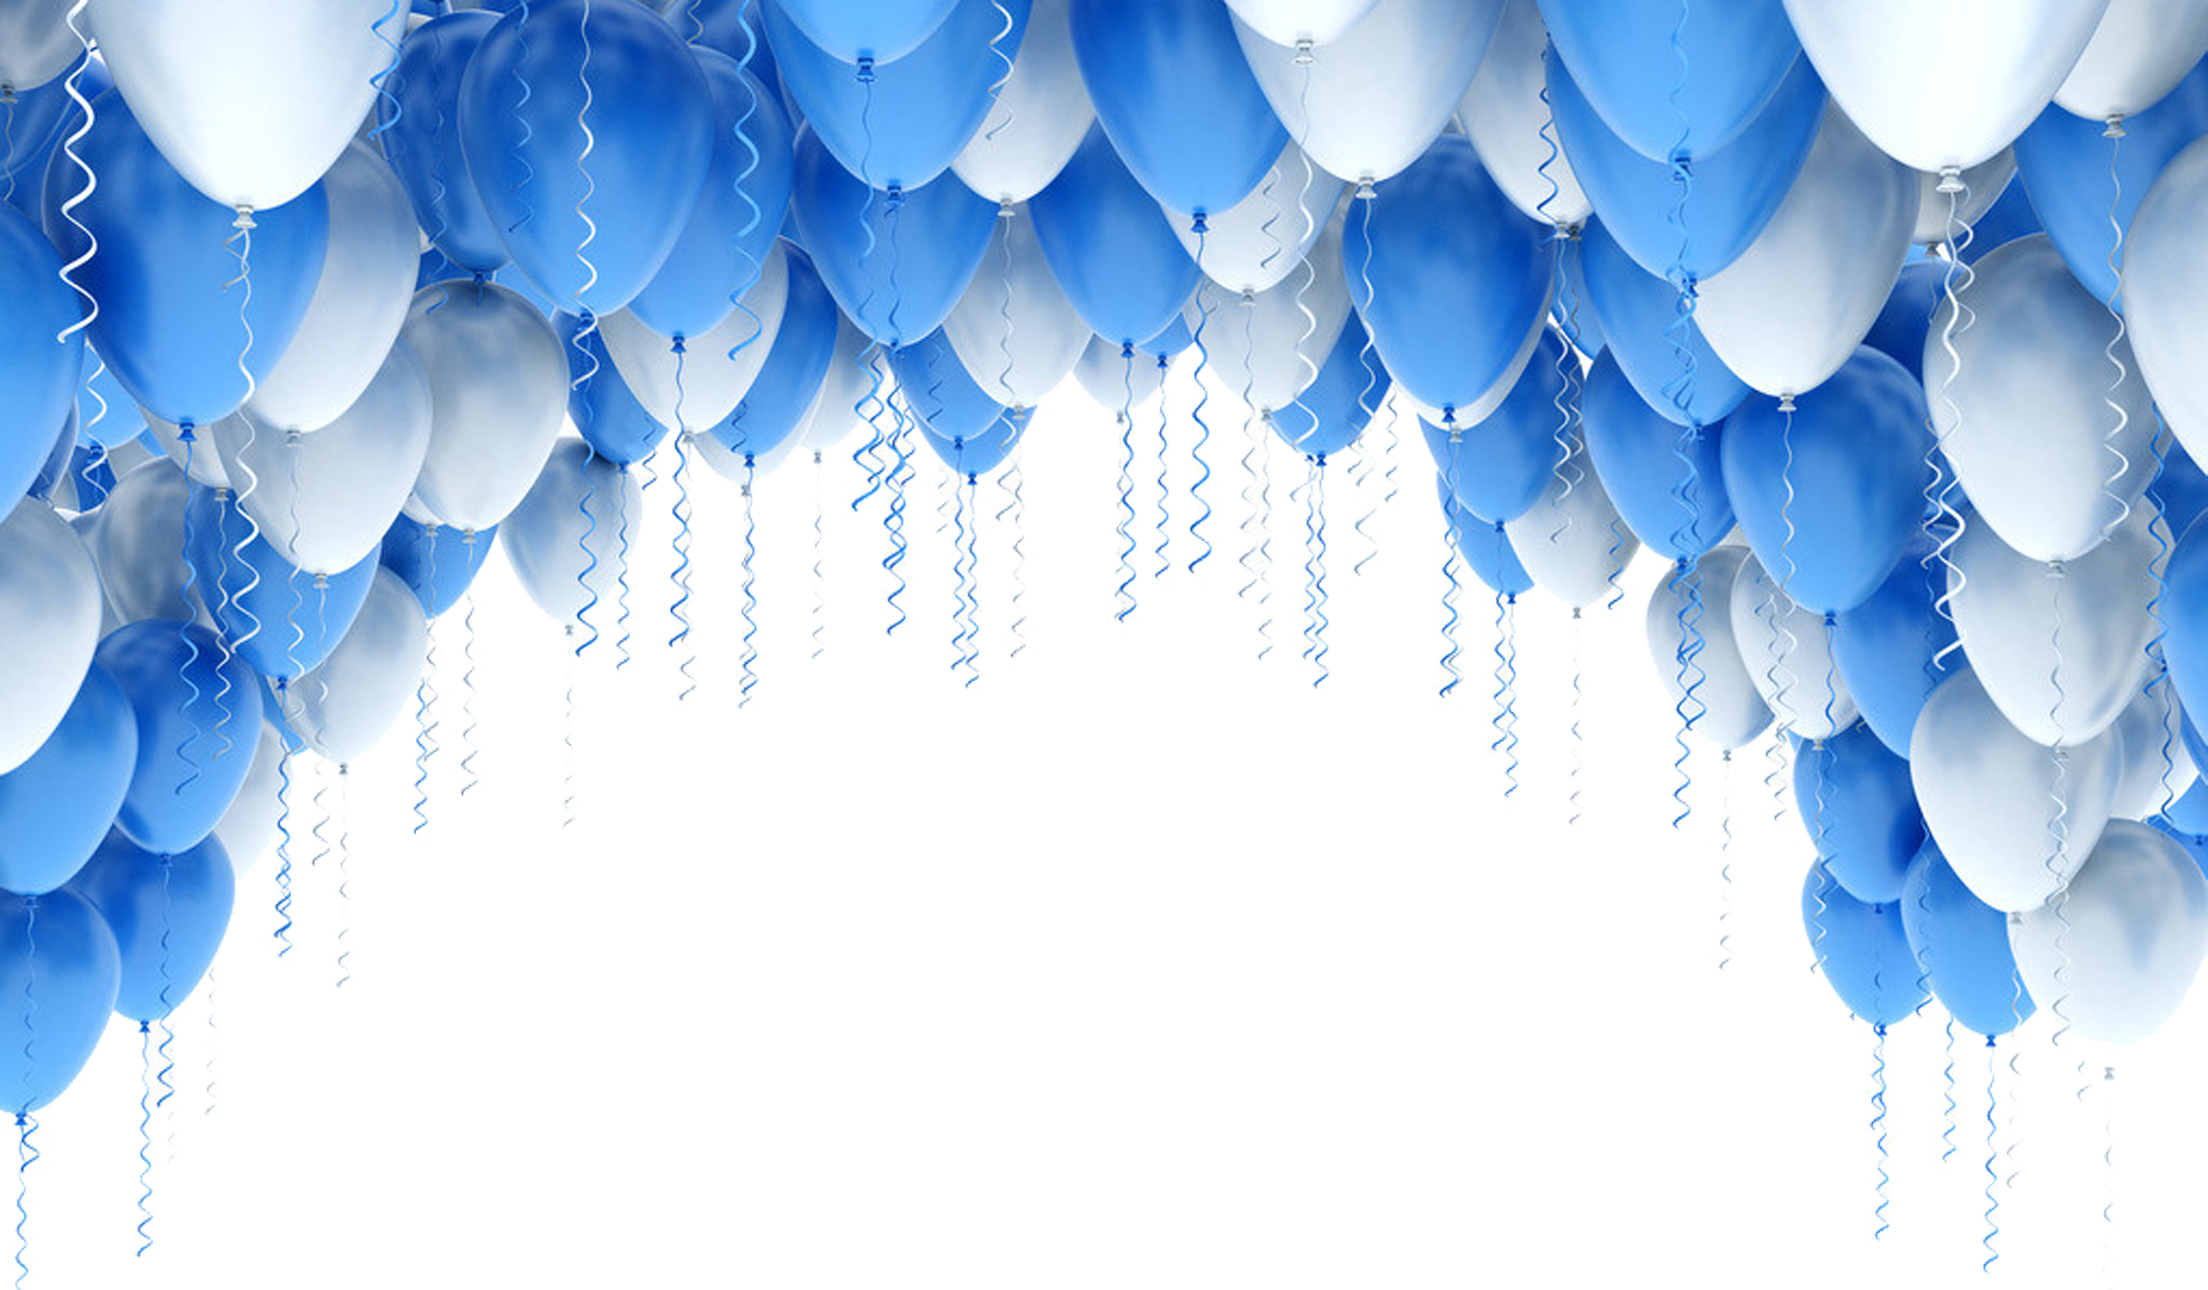 Blue Balloon Illustration Arches Photography Stock Clipart